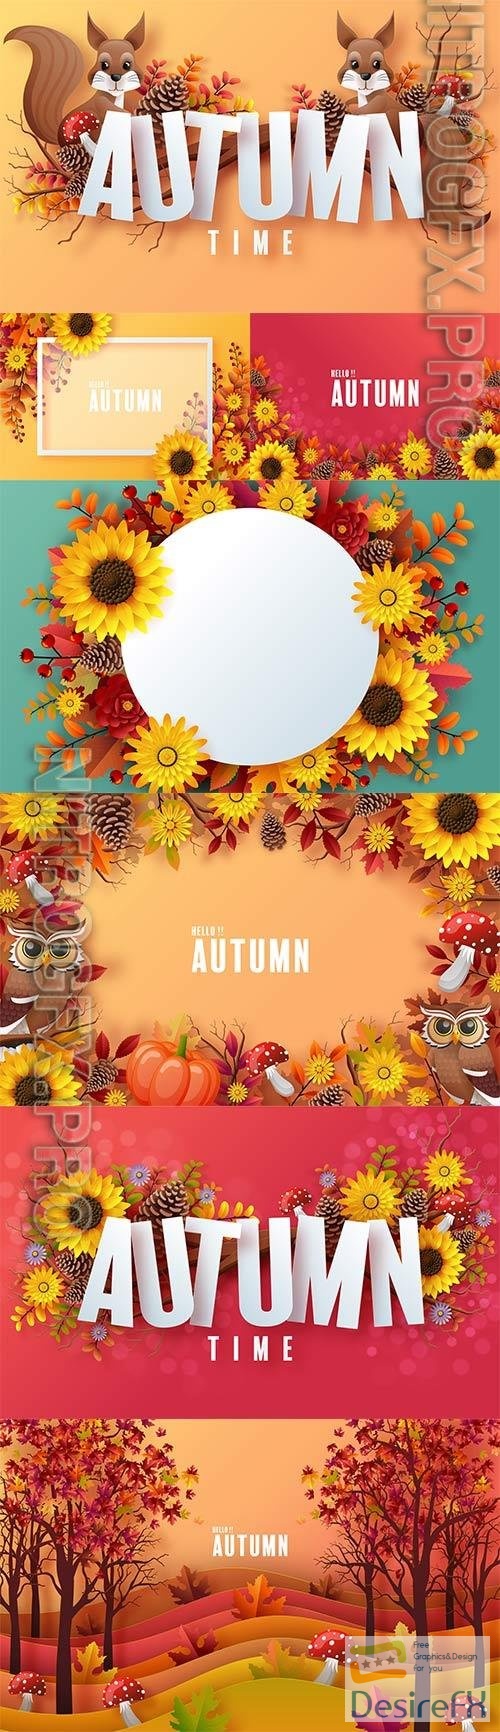 Autumn vector background with colorful autumn leaves